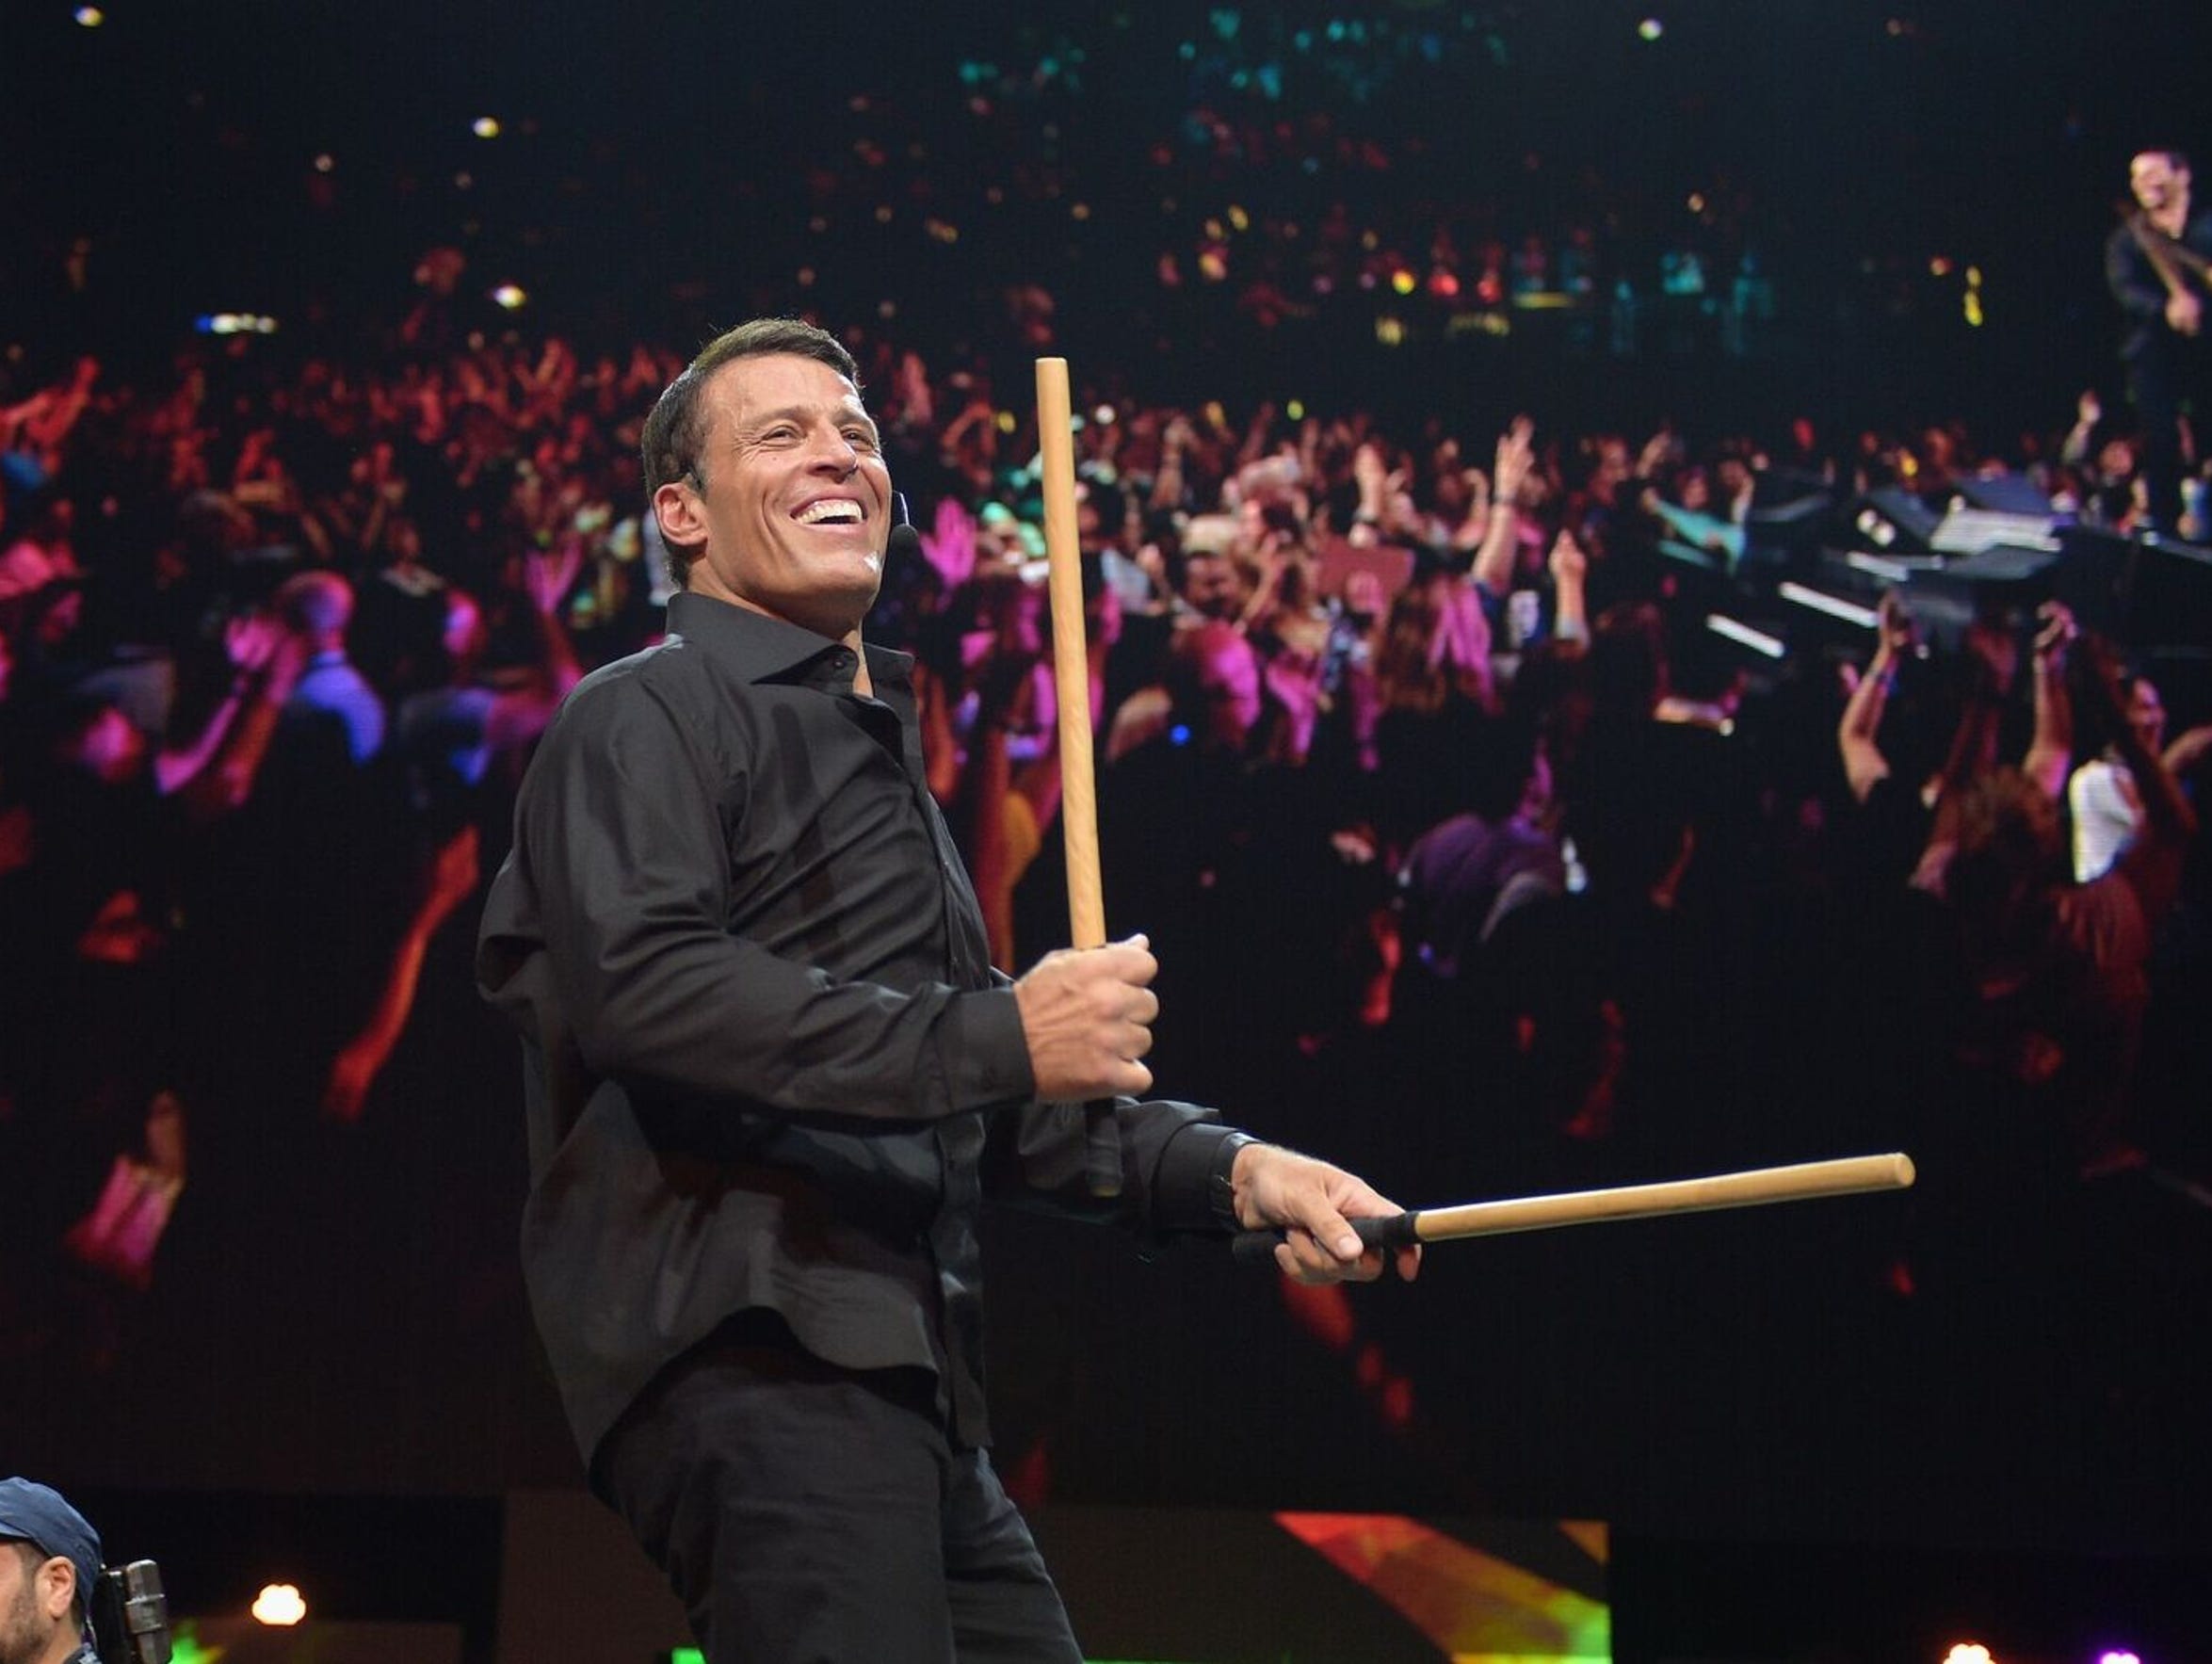 Tony Robbins bangs sticks together at the start of